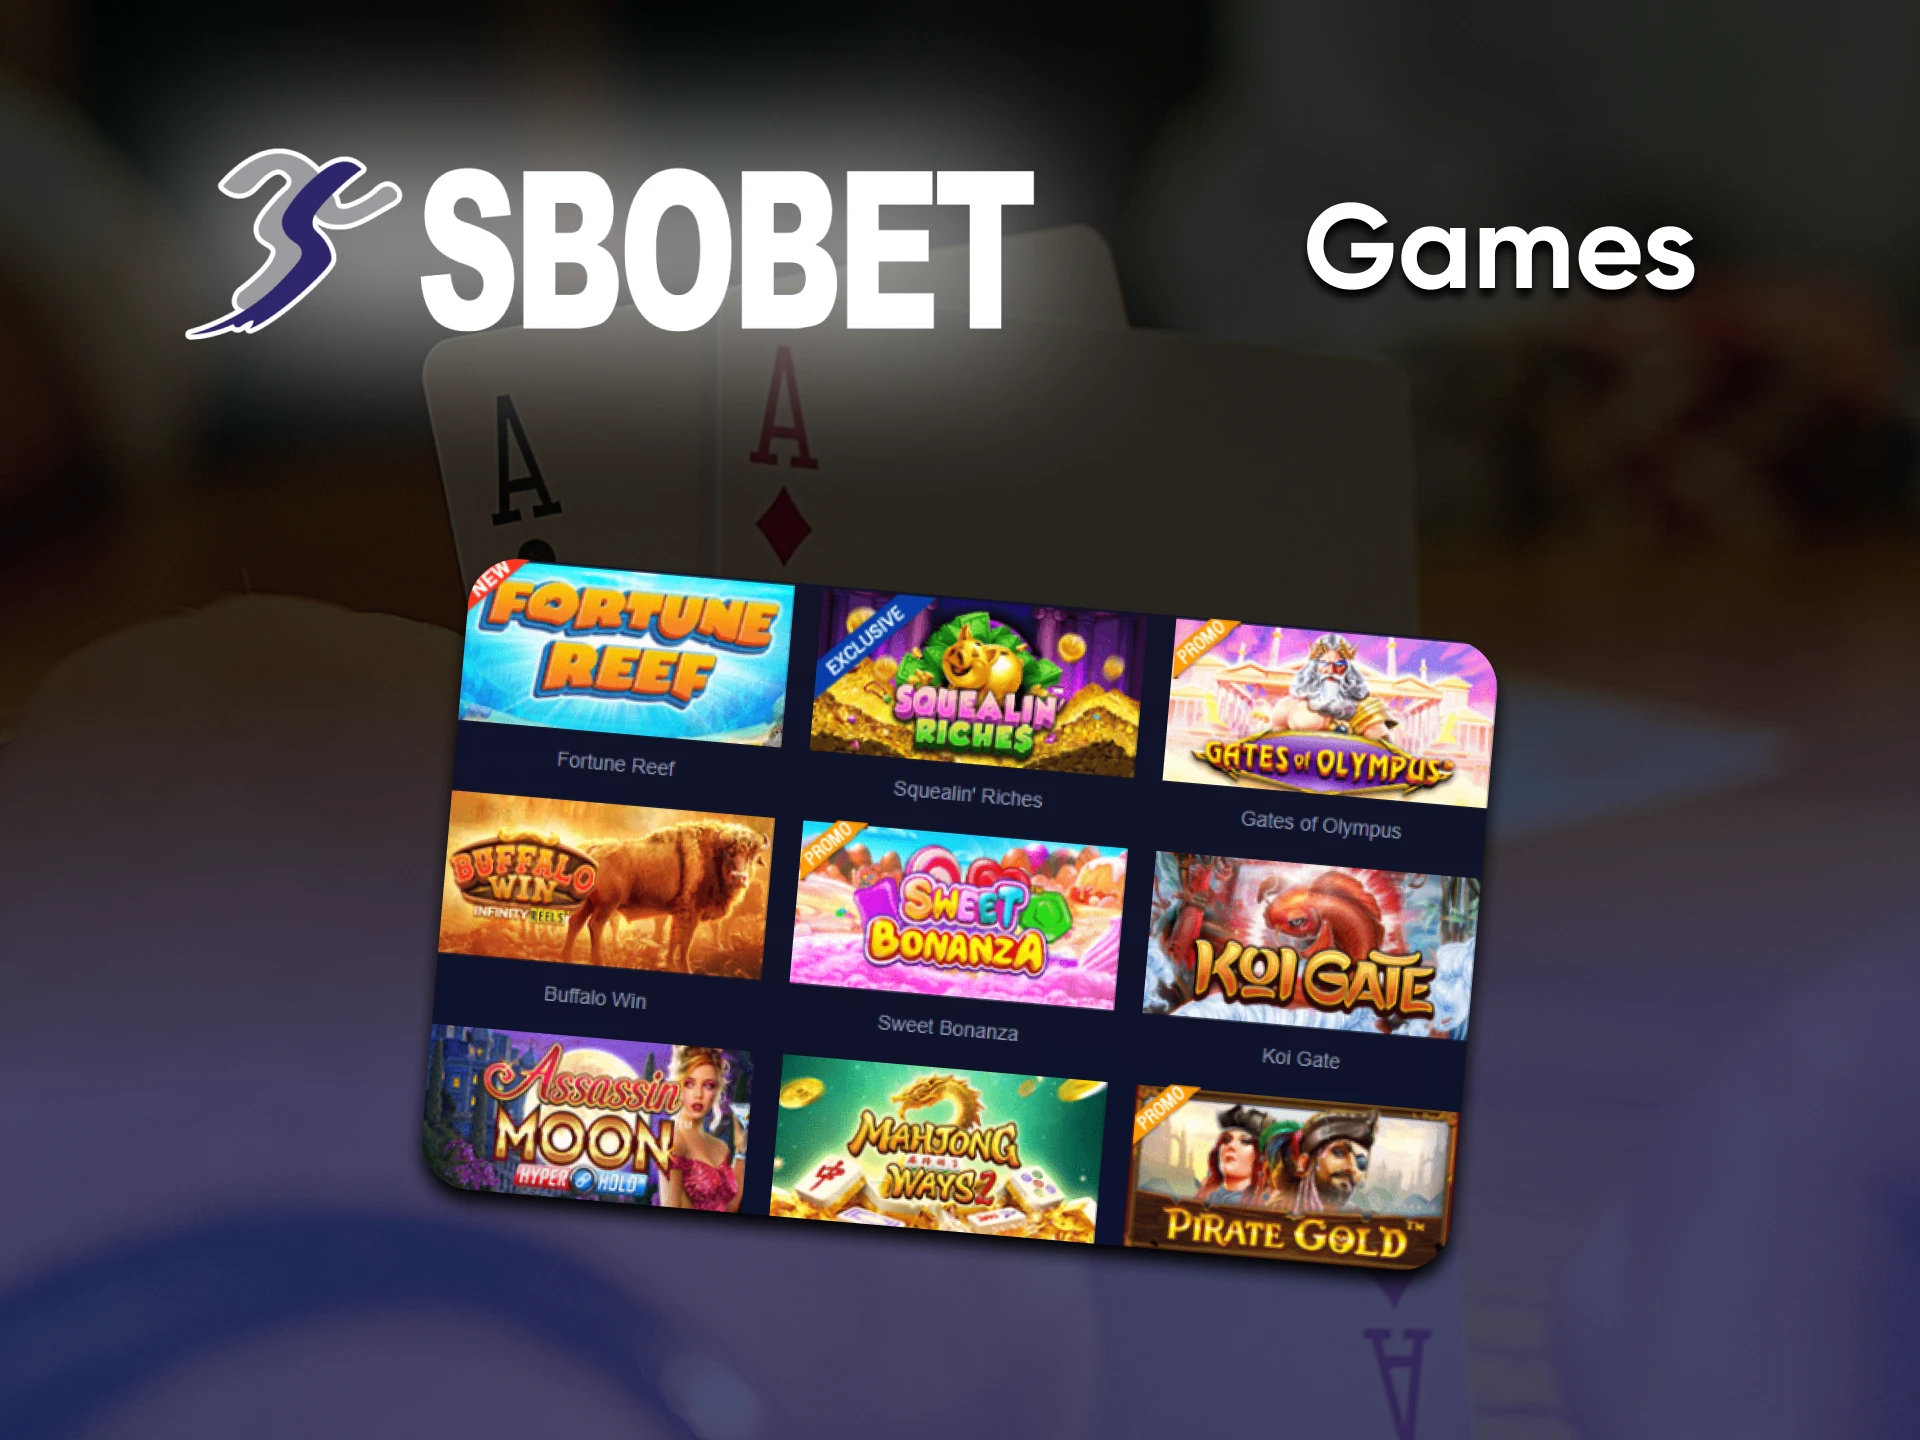 Play a variety of casino games from Sbobet.